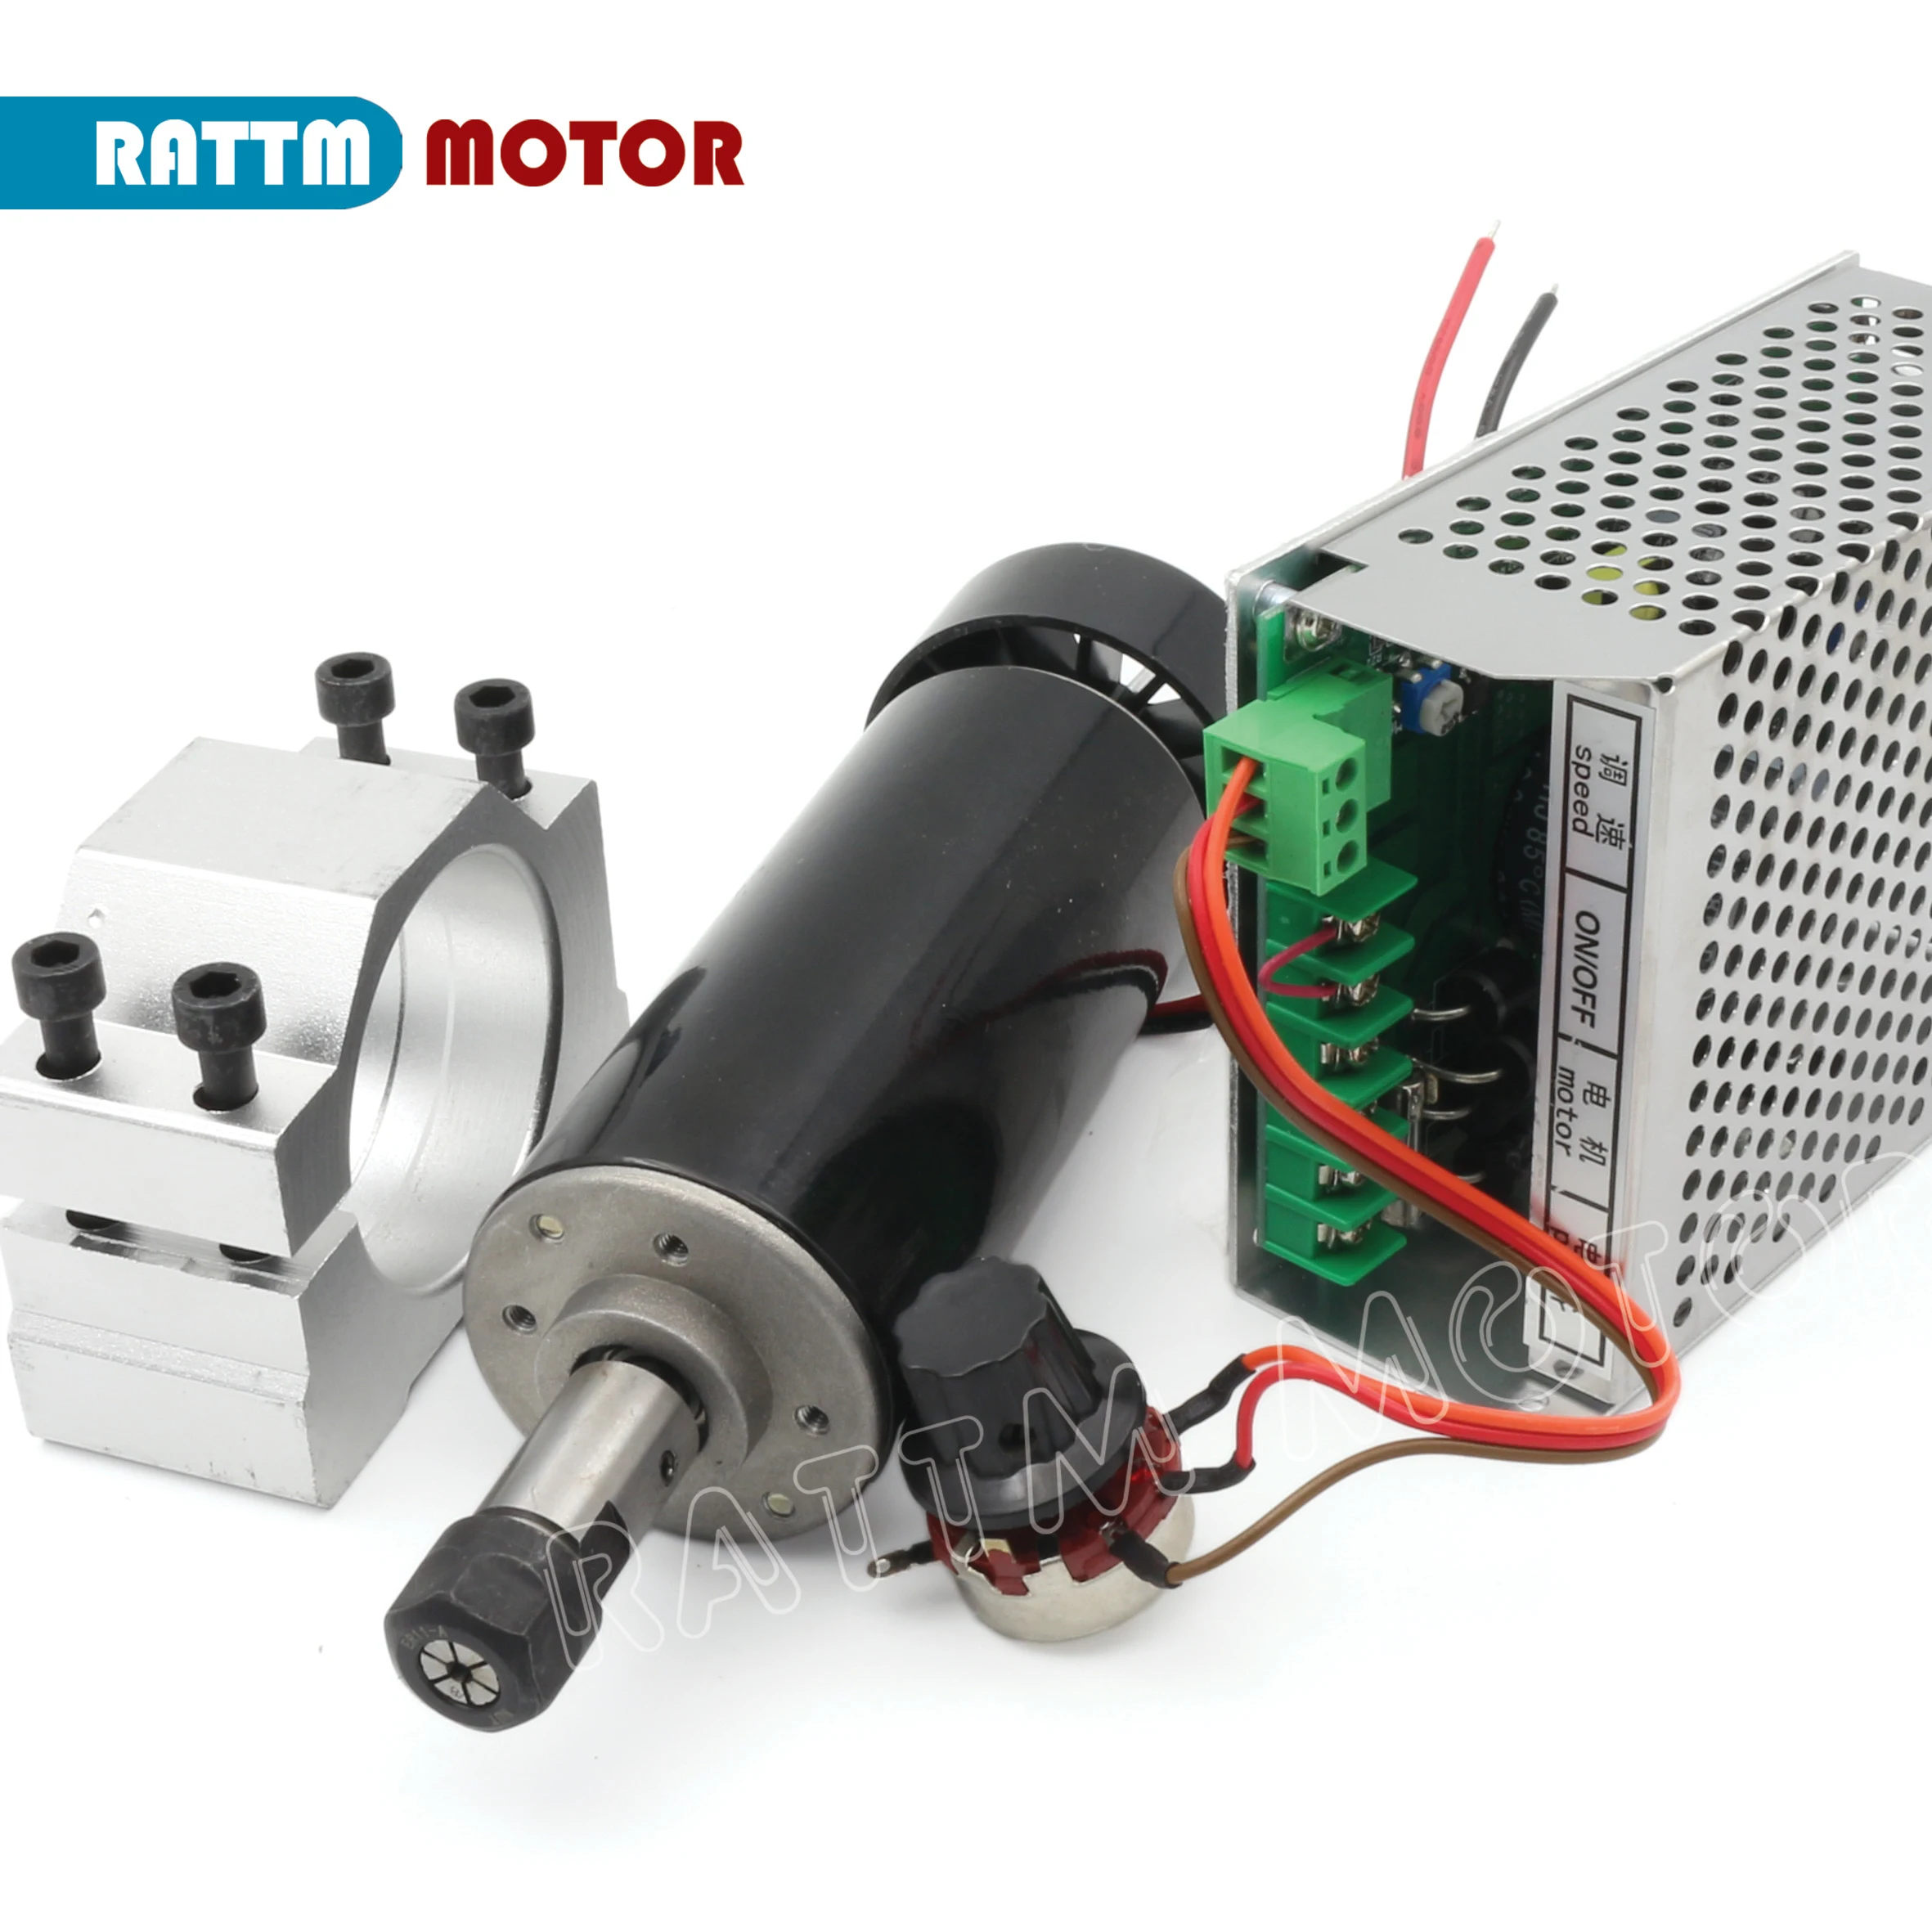 RATTM 500W Air Cooled Spindle Motor ER11 CNC 0.5KW Spindle Motor +Power Supply Speed Governor +52mm Clamp for DIY CNC Router